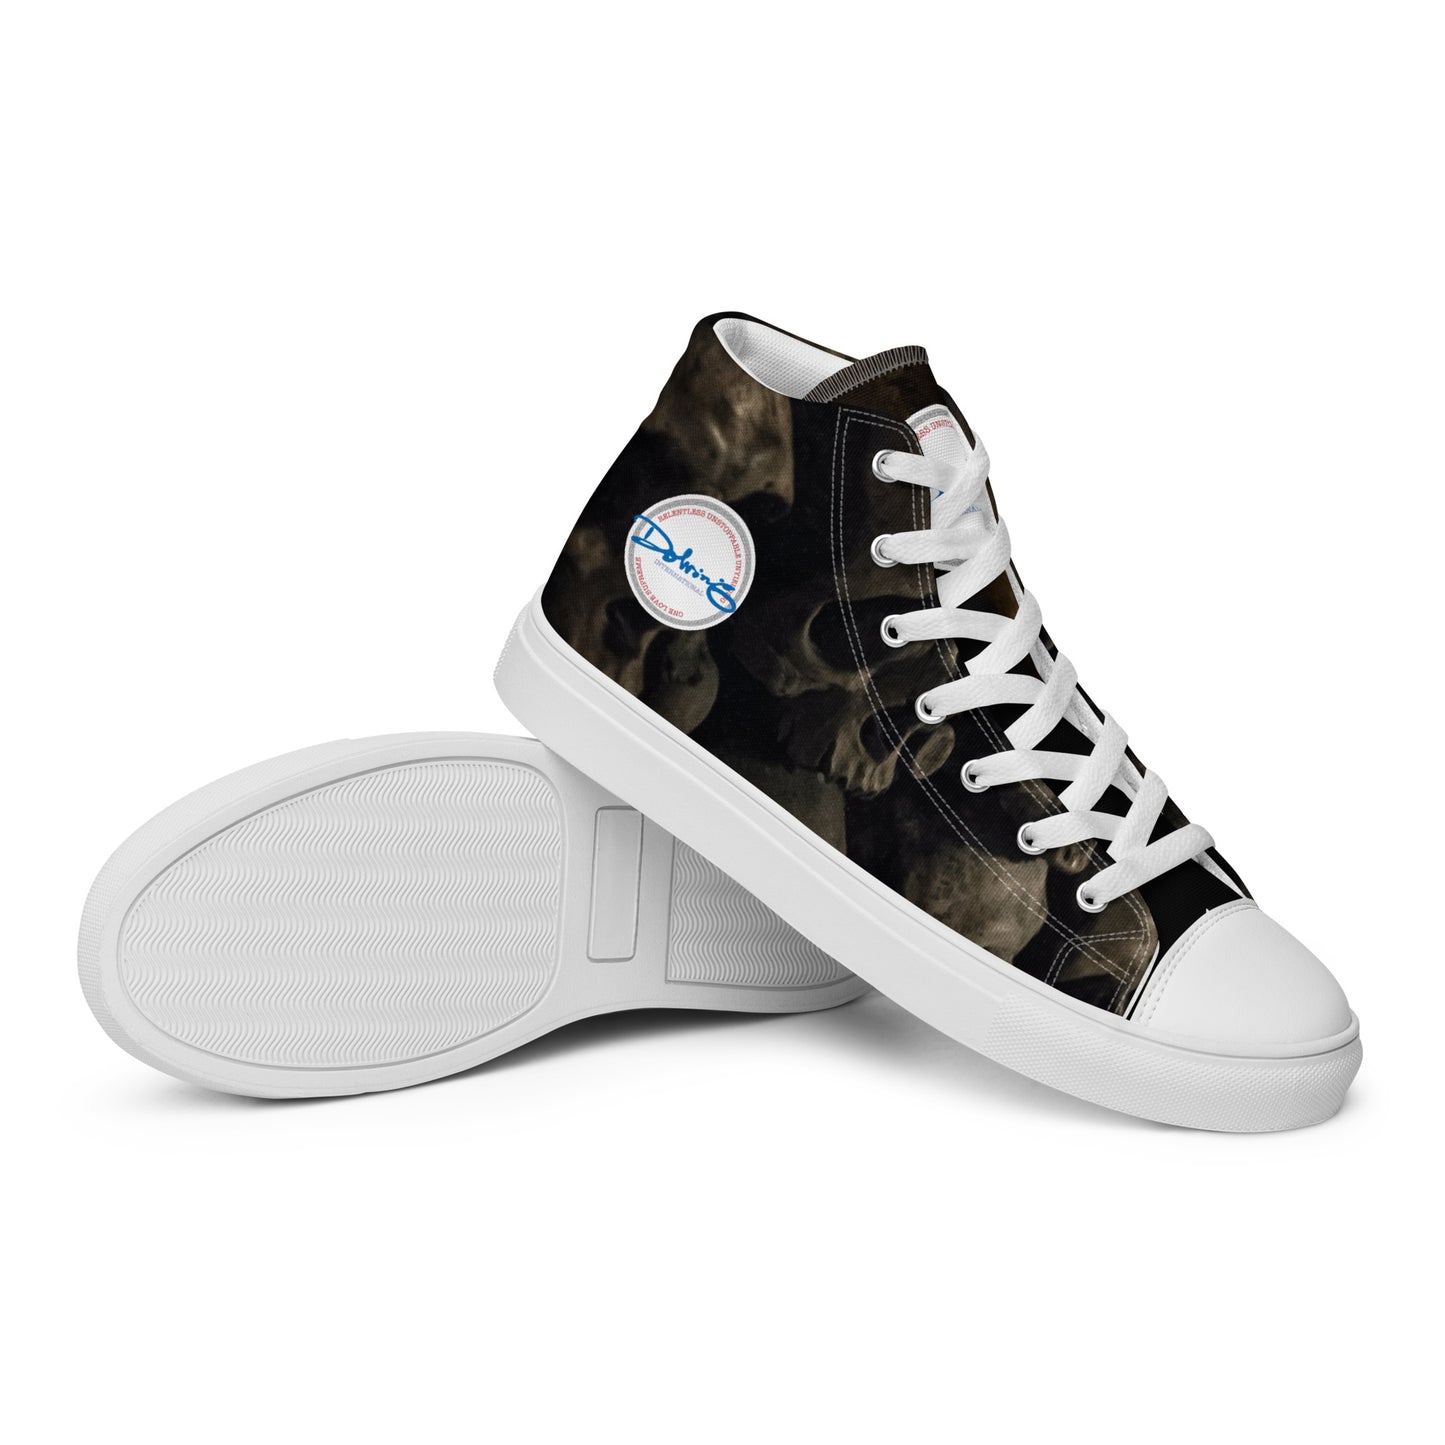 SKULLS by DOLVING - Men’s high top canvas shoes